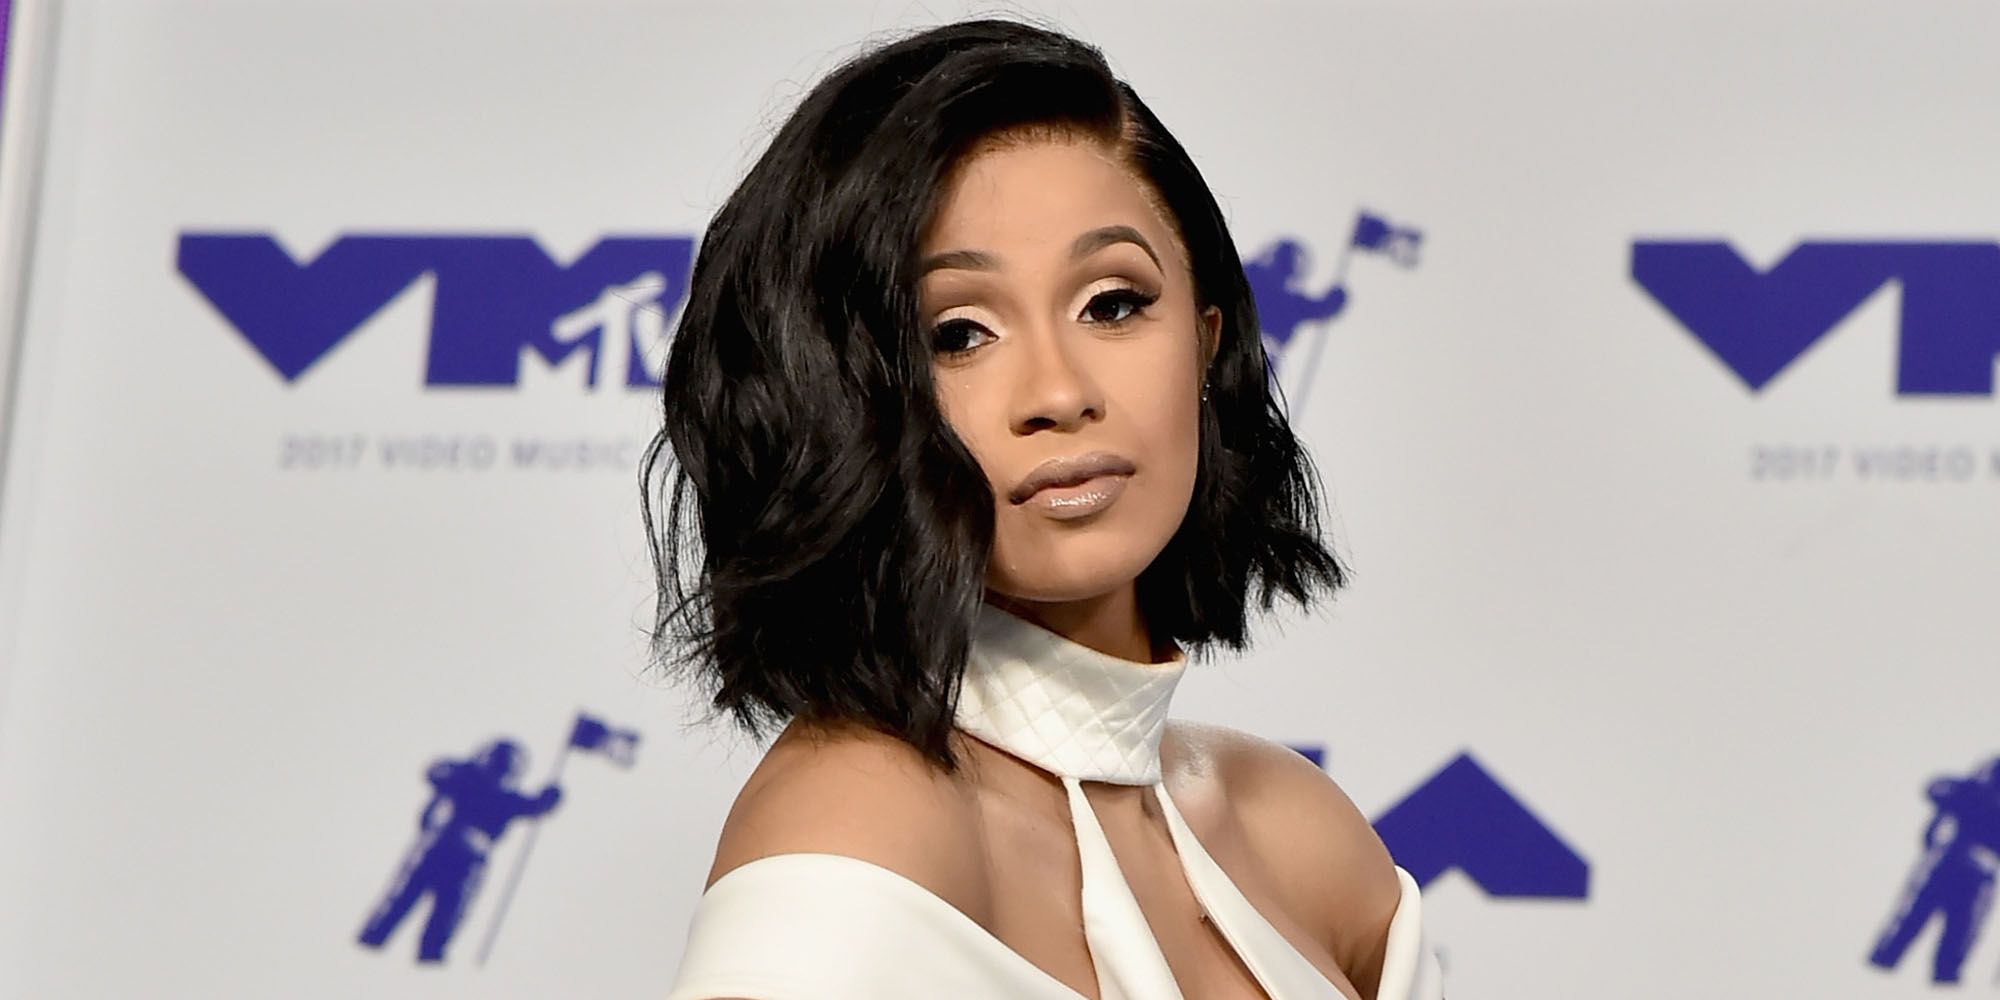 Cardi B Is The Latest Celebrity To Rock Pamela Anderson's '90s